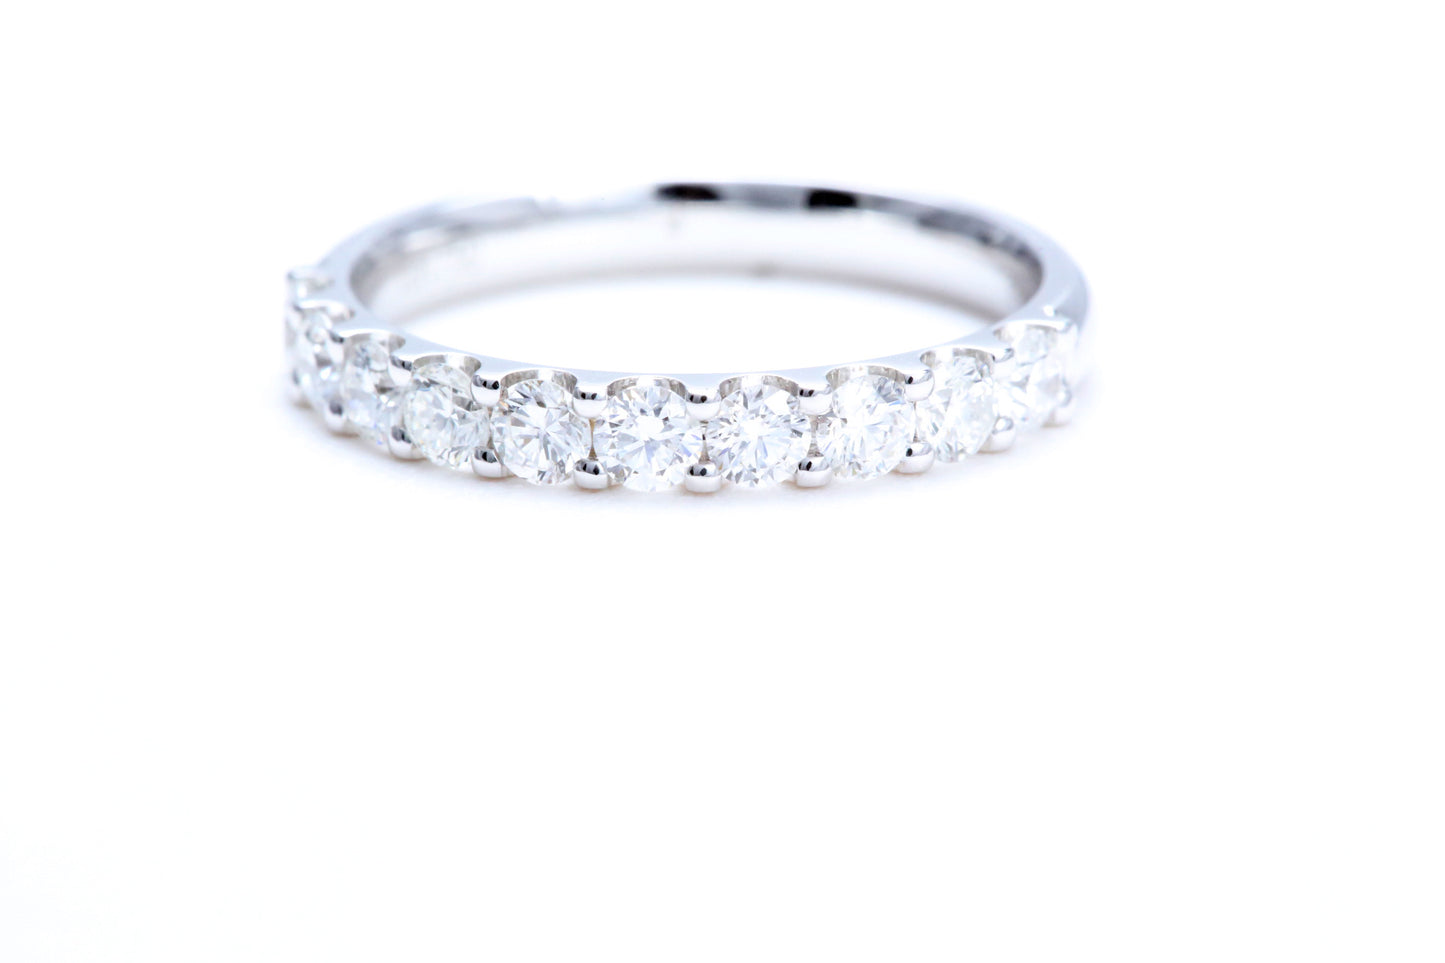 Minimalist Pavé Diamond Ring 3/4 of a carat total weight in 18K white gold